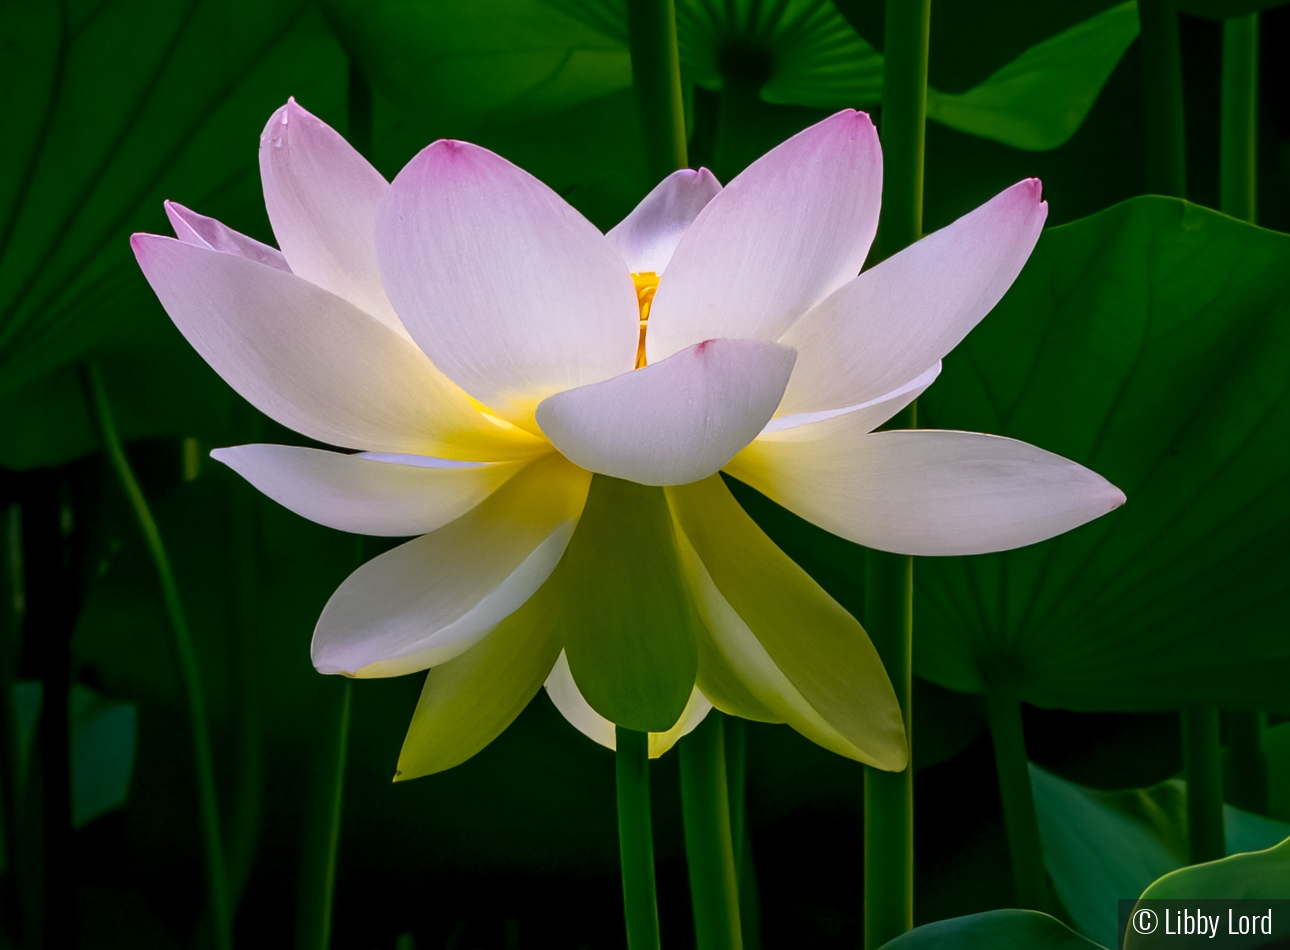 The Glow of a Lotus by Libby Lord